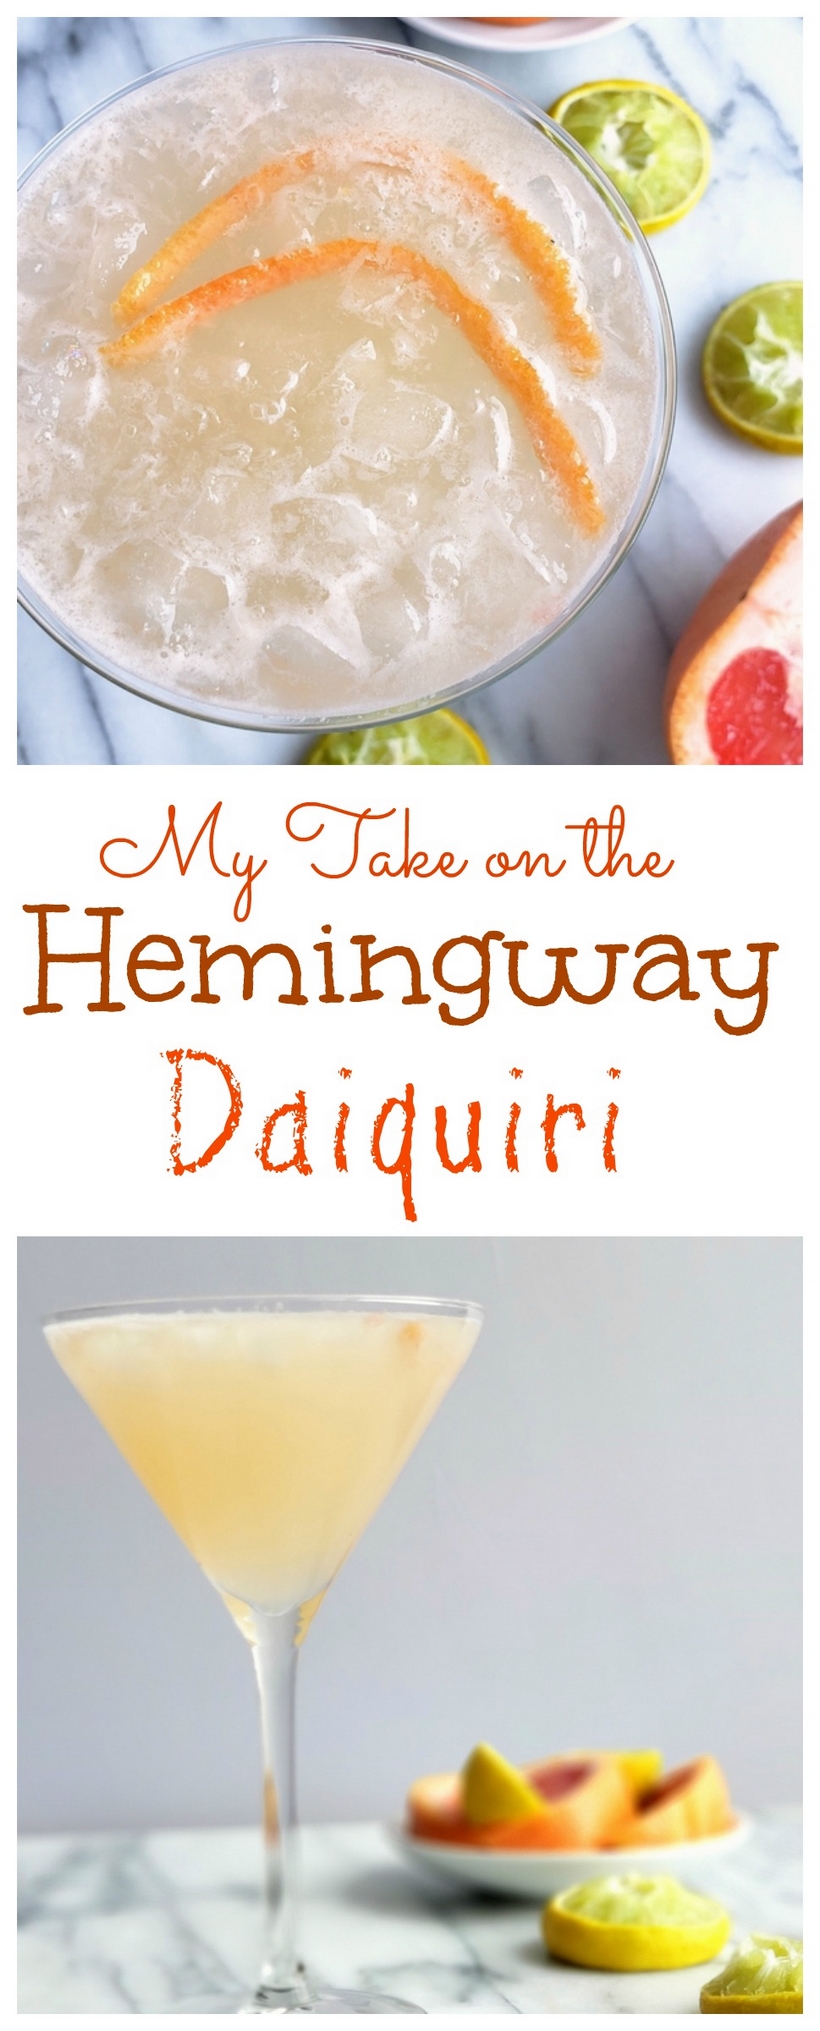 Ernest Hemingway became obsessed with the daiquiri after spending time in Cuba. This is my take on the special recipe created for him in his honor. #cocktail #daiquiri